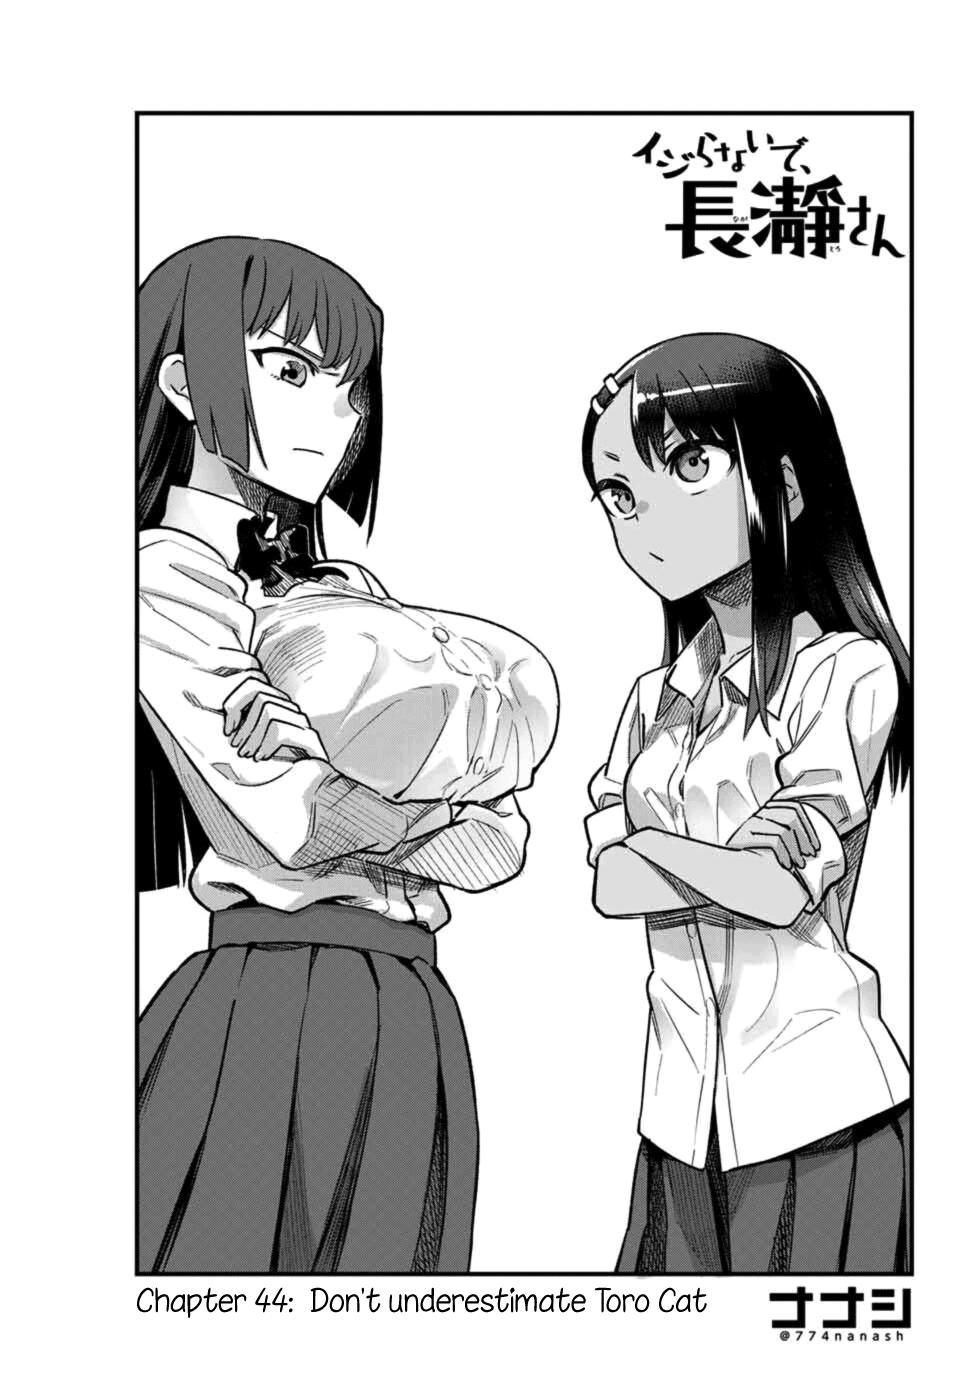 Don't Toy with Me, Miss Nagatoro 6